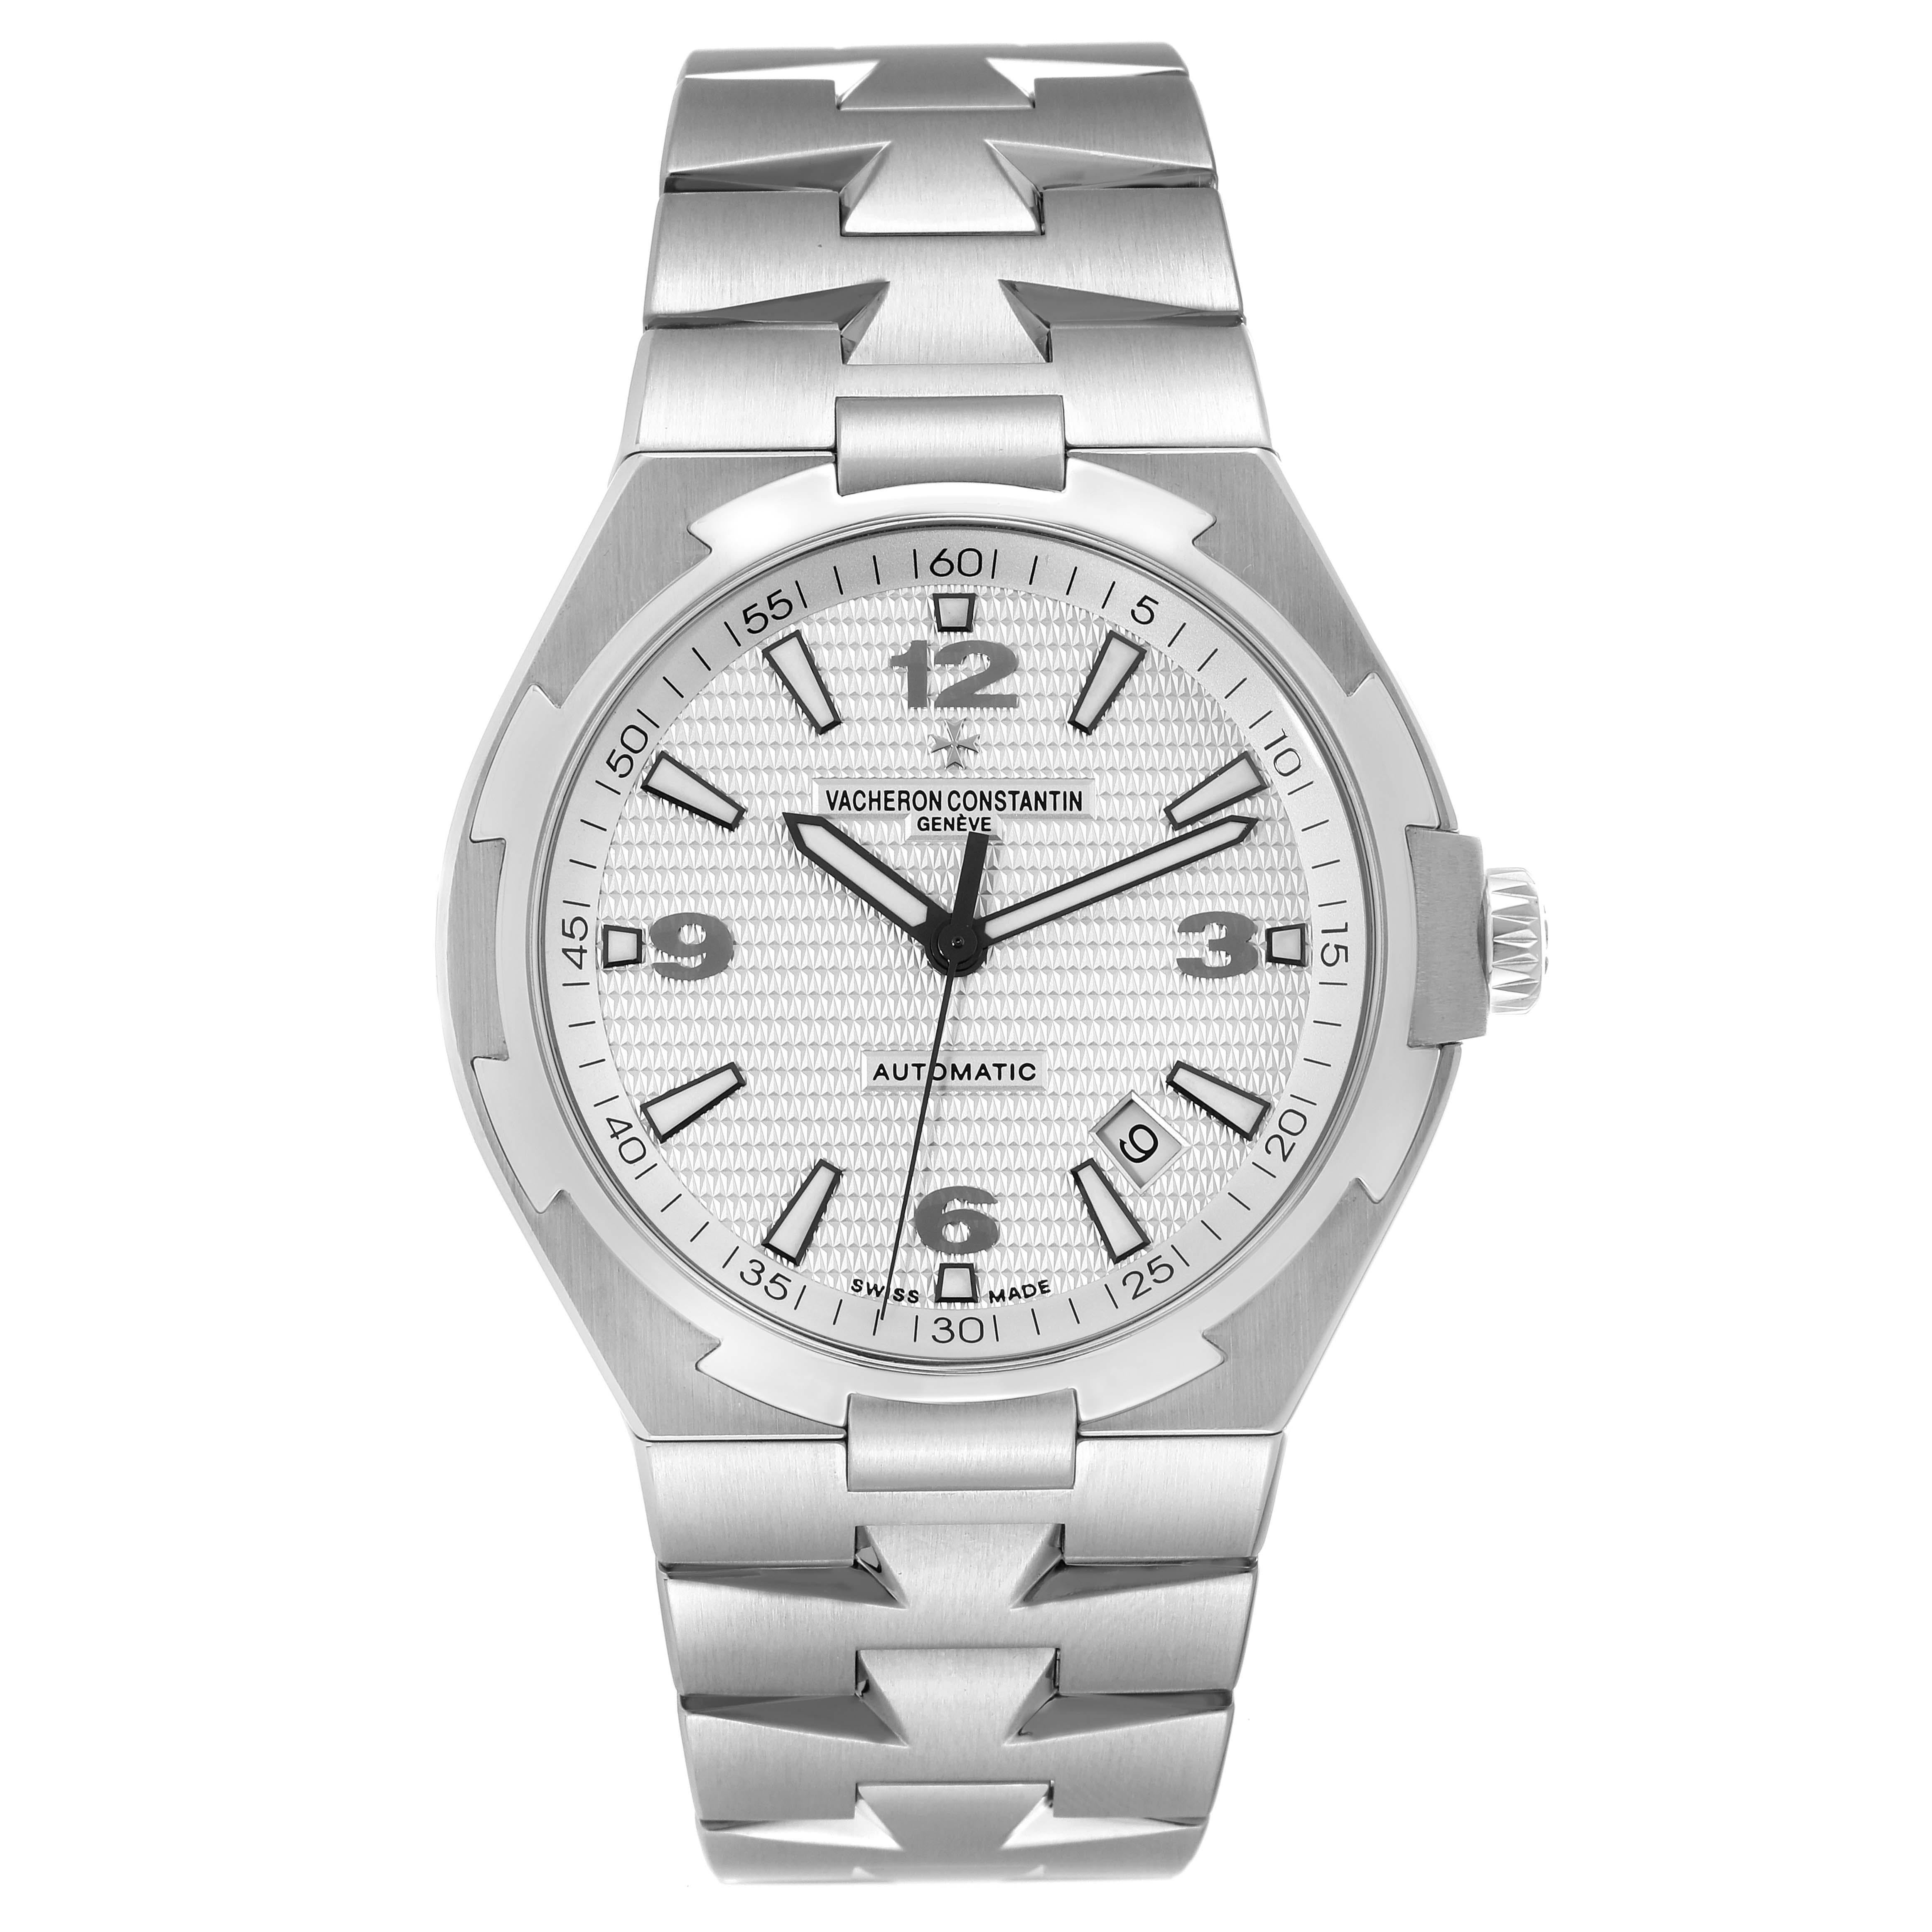 Vacheron Constantin Overseas Silver Dial Steel Mens Watch 47040 Box Papers. Automatic self-winding movement. Brushed stainless steel case 42.5 mm in diameter. Screwed down crown with Vacheron logo. Solid caseback with 'overseas' medalion. Polished